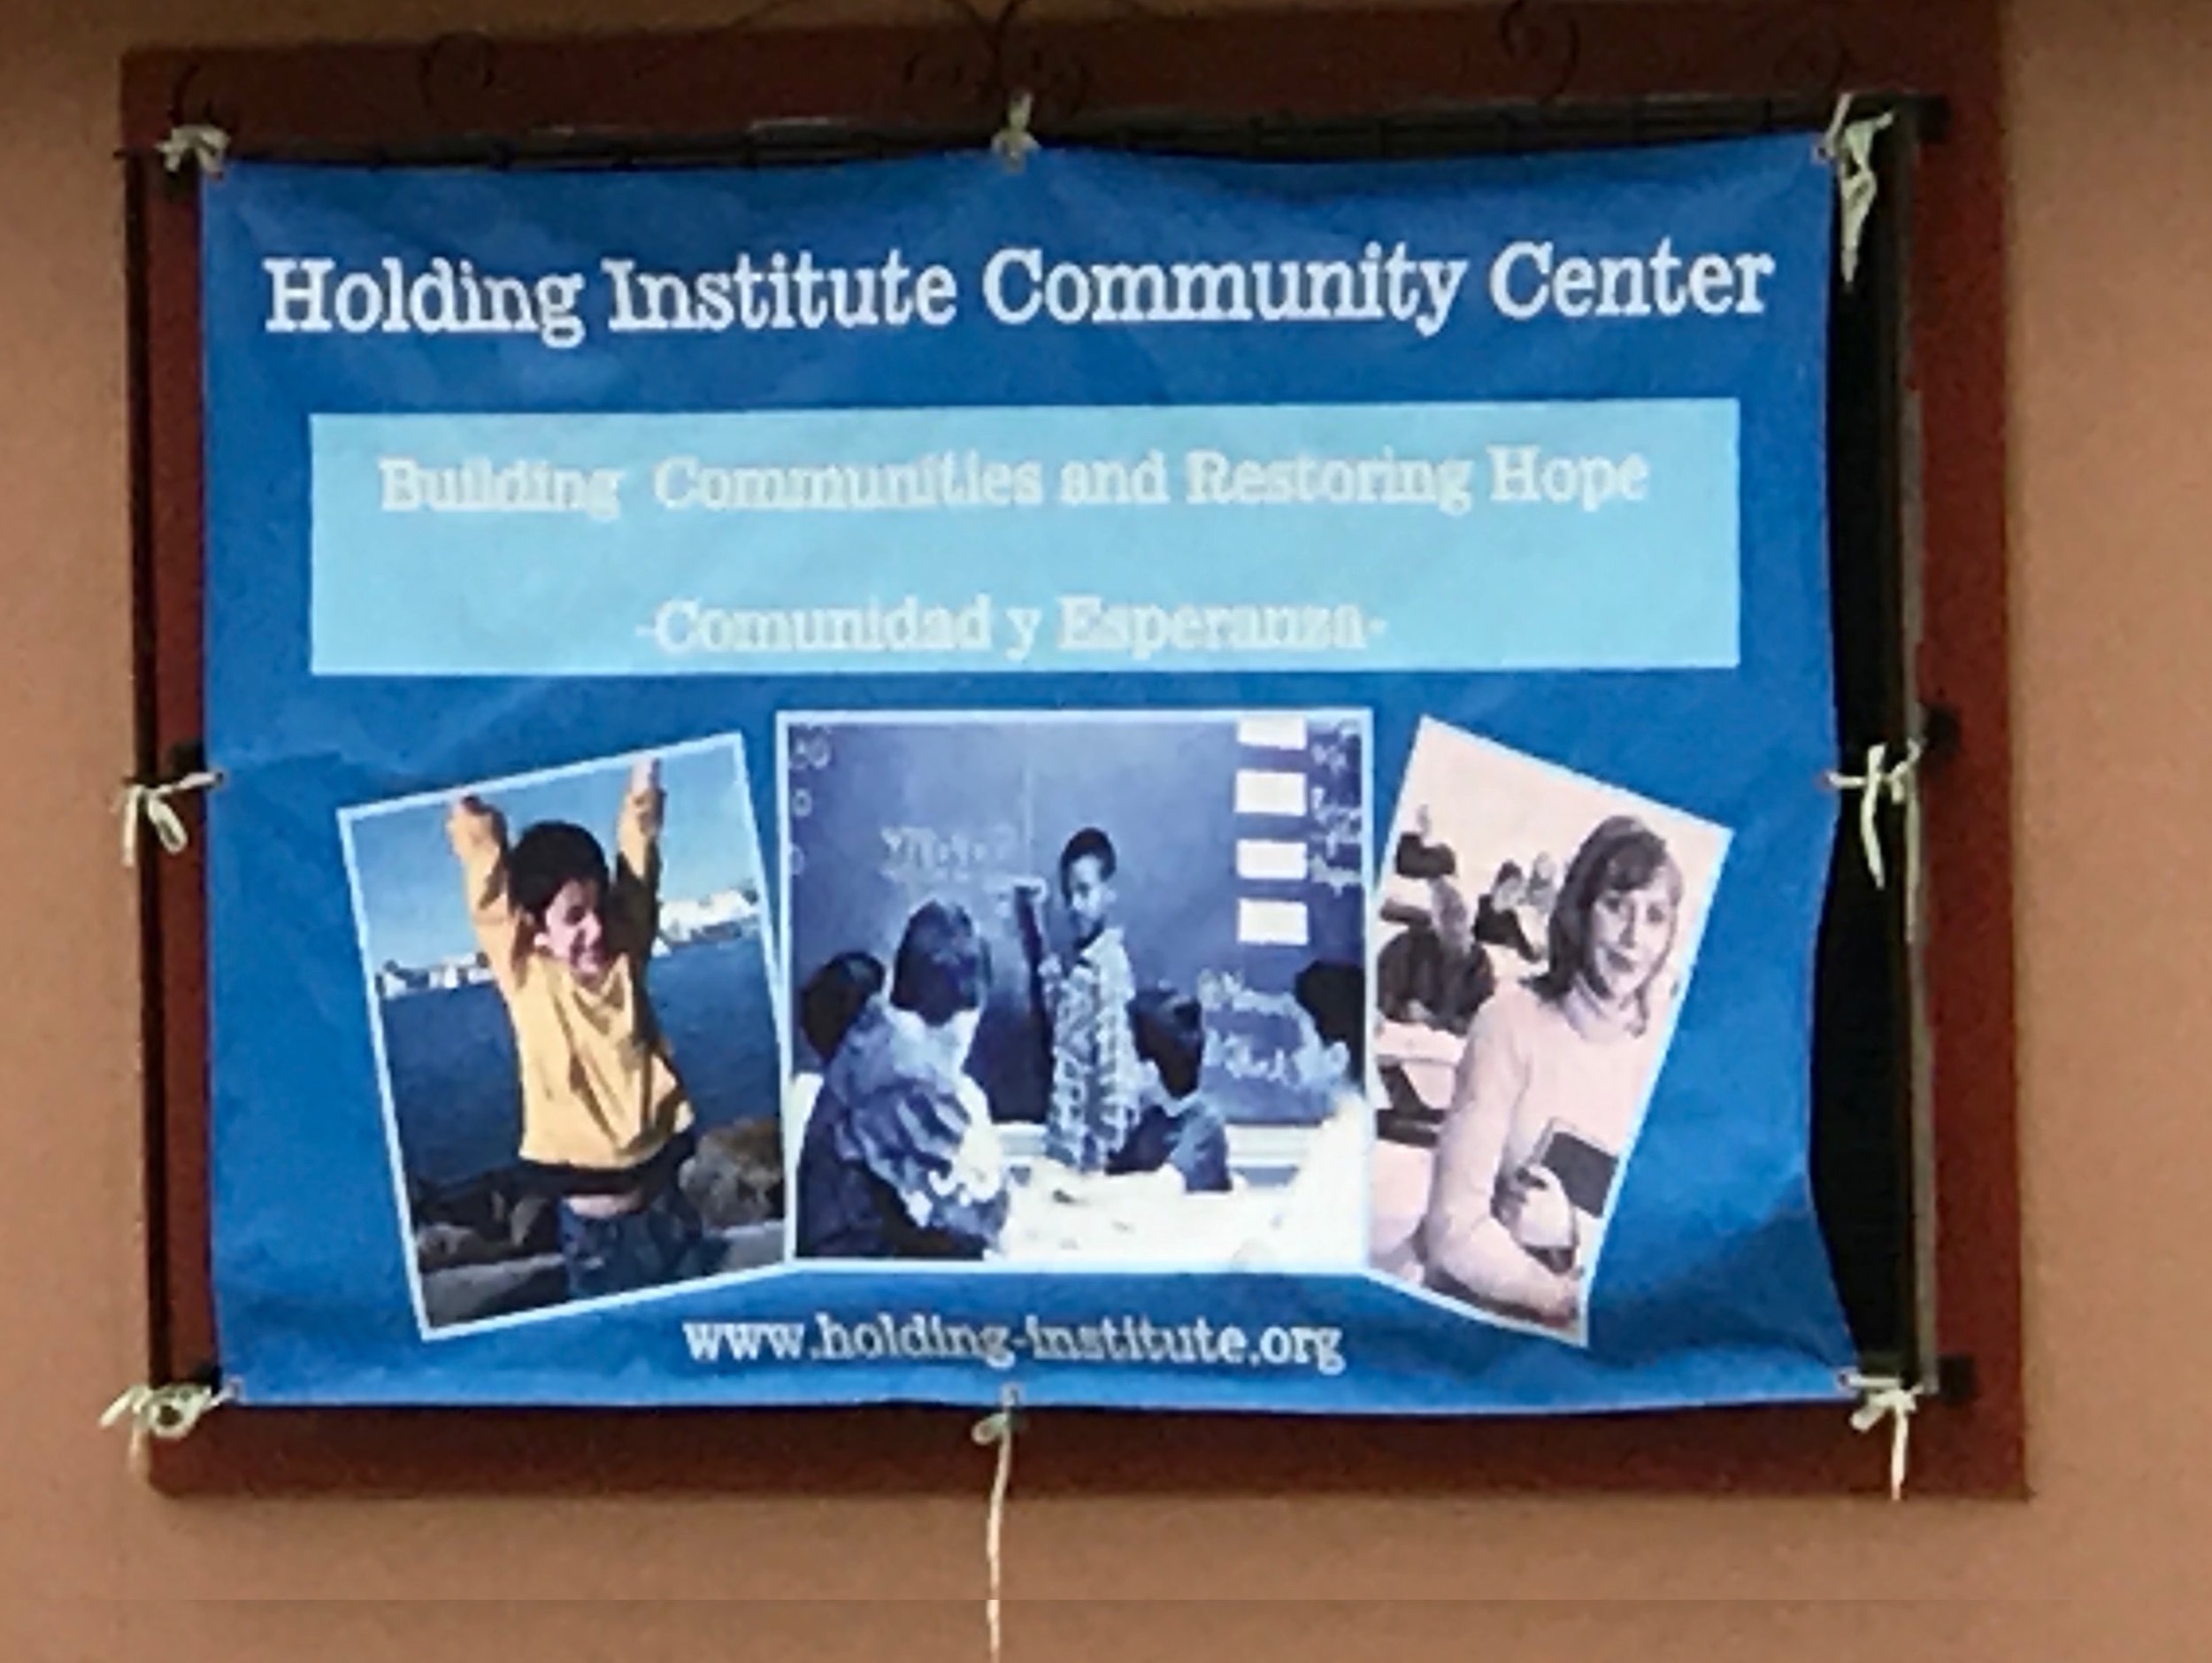  The Holding institute, founded in 1882 as a kindergarten and primary school, has gone through many seasons and changes during its’ lifetime. Responding to the 2014 arrivals of unaccompanied minors at the U.S. / Mexico border and now a key responder 